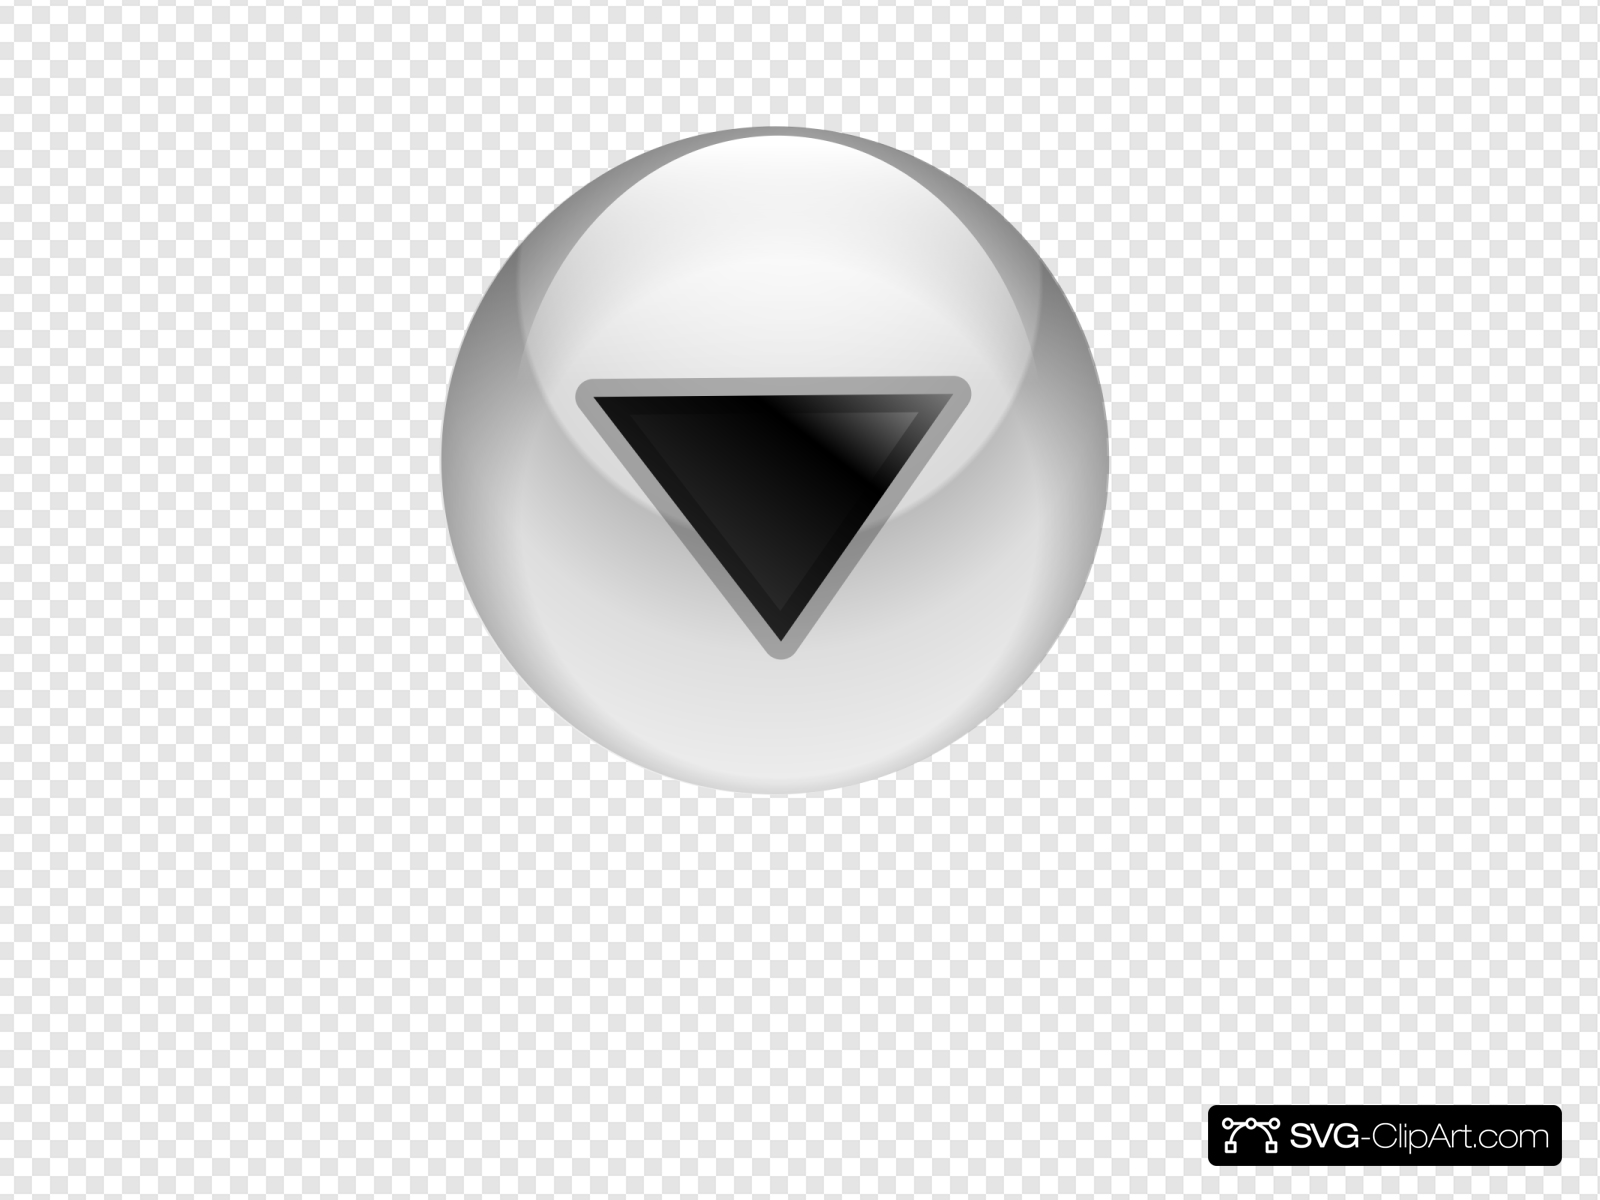 Simple Minimize Clip art, Icon and SVG.